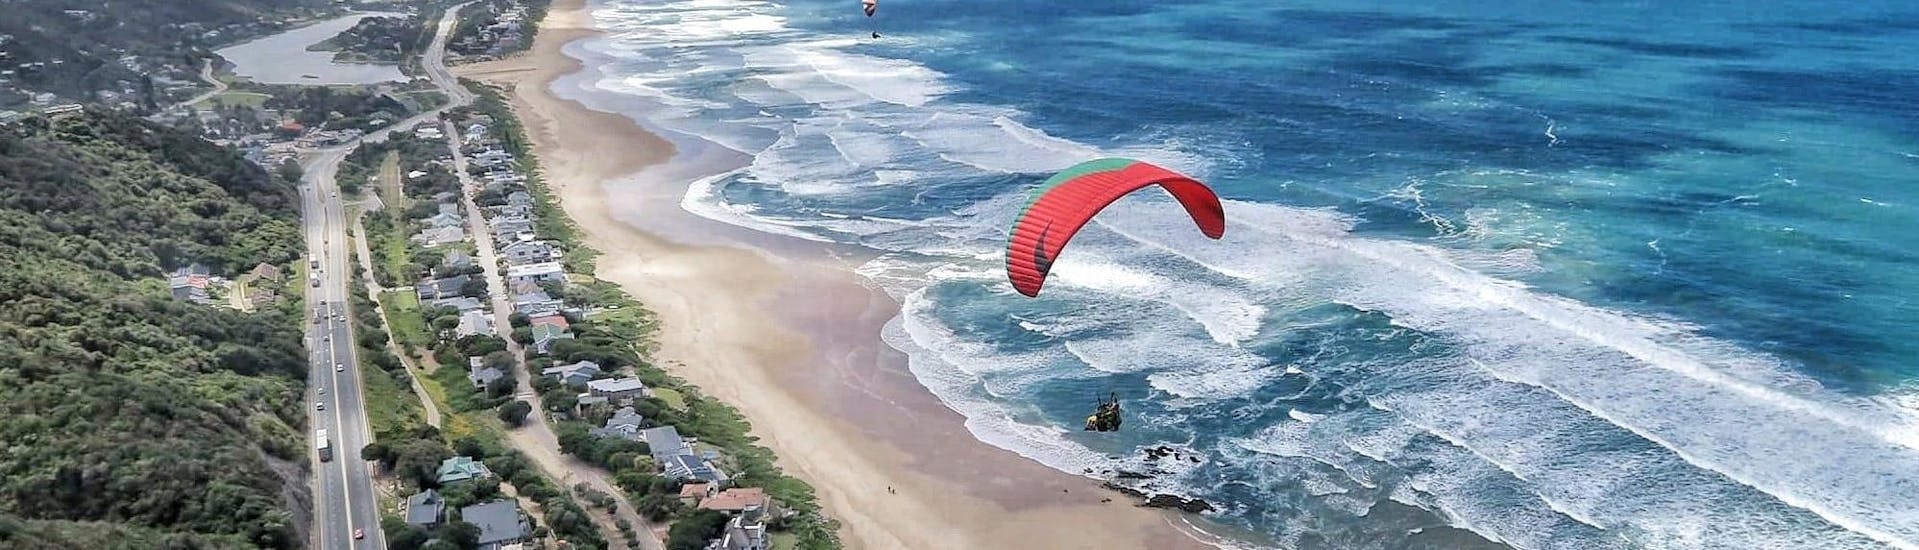 During the Paragliding in Wilderness - Standard Flight, an experienced tandem pilot from Dolphin Paragliding Wilderness is flying with a customer above the ocean.